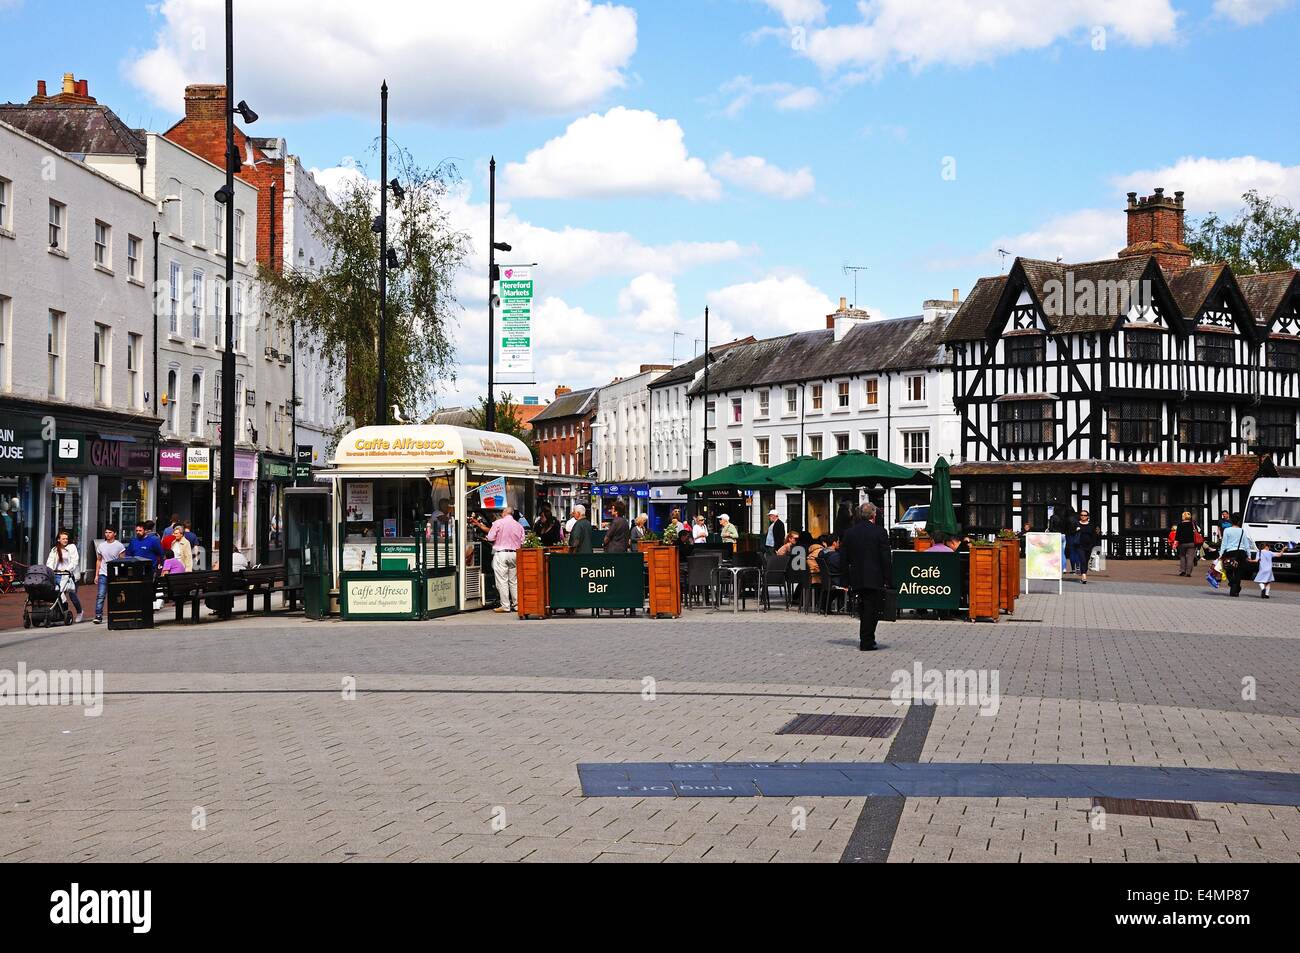 View of shopping area in the centre of the city with a pavement cafe and the High House in High Town Built in 1621, Hereford, UK Stock Photo